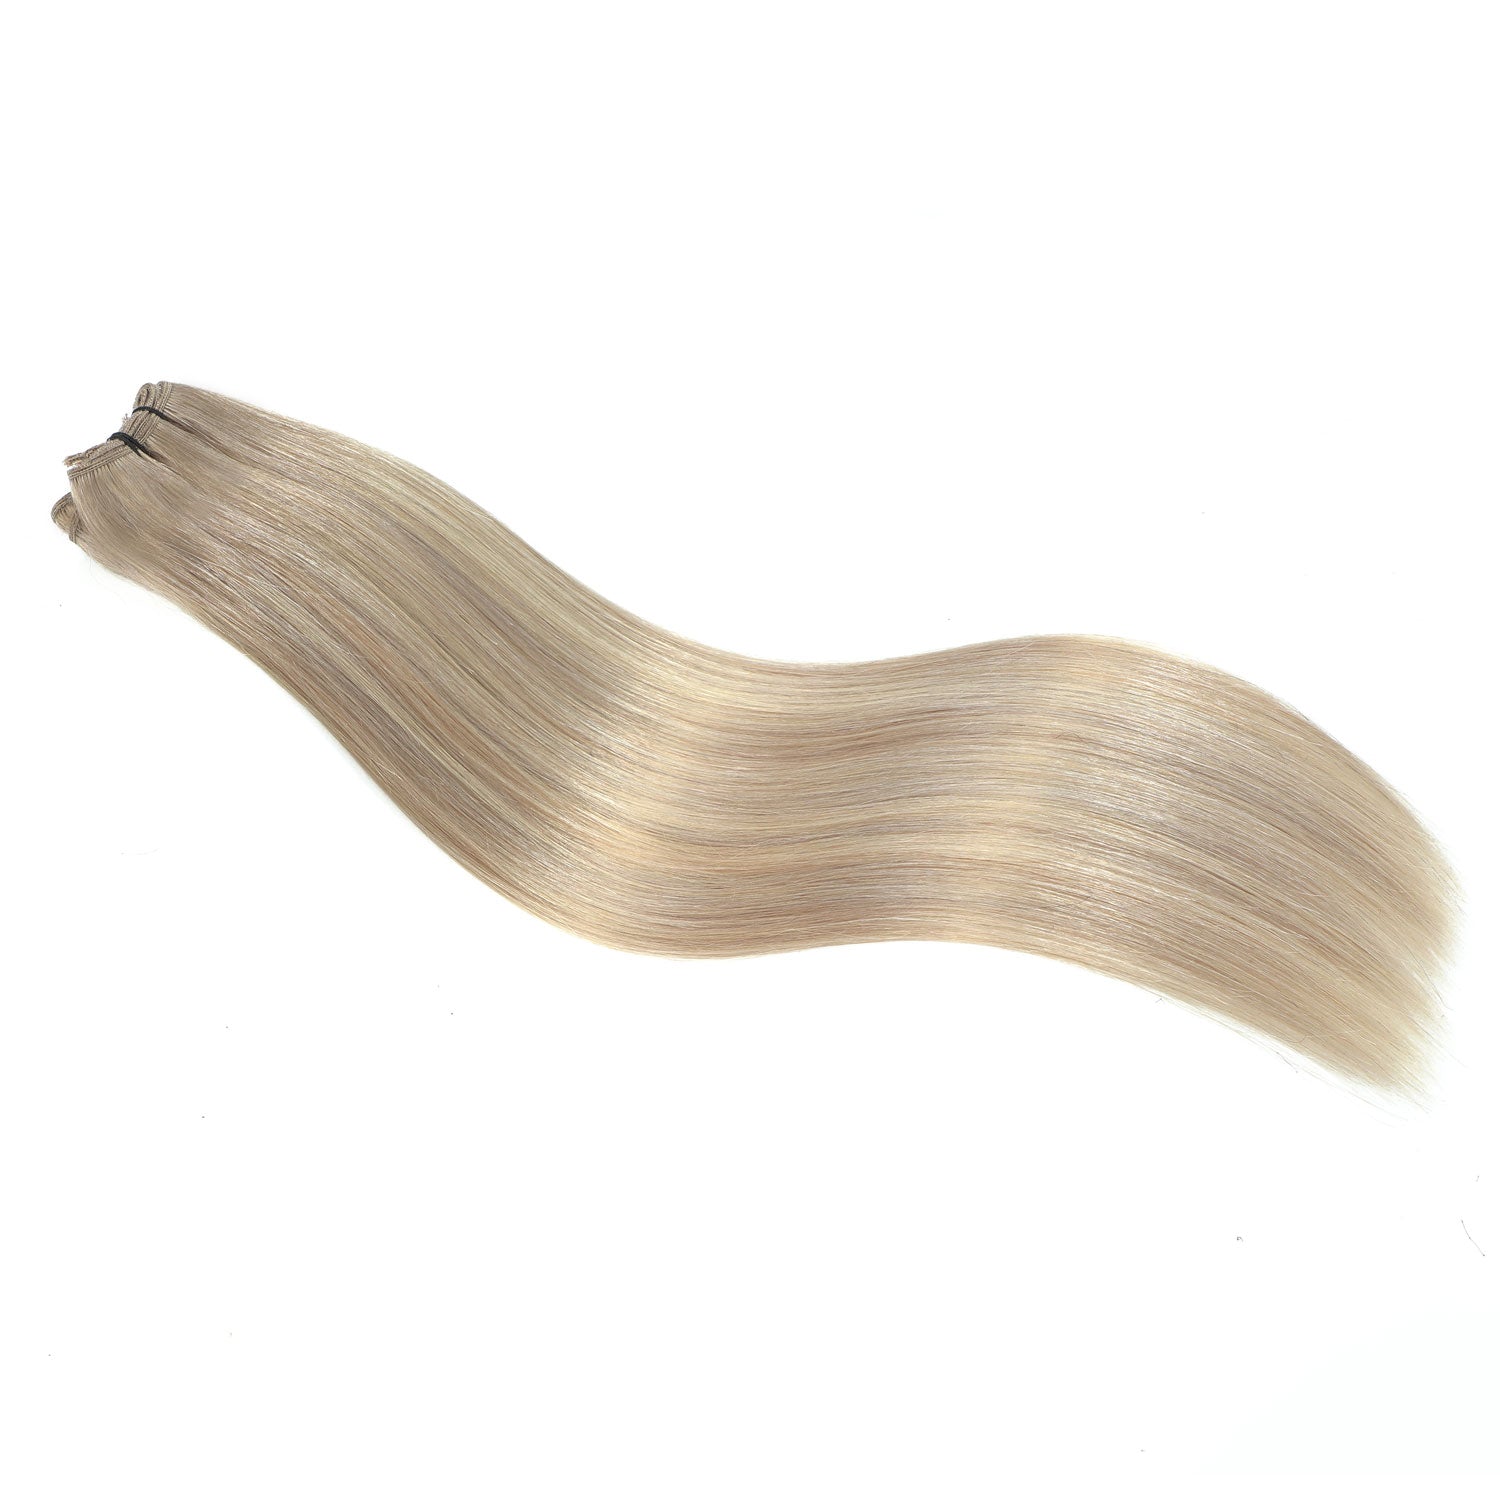 Weft Hair Extensions 25" #17/17/1001 Dark Ash Blonde and Pearl Blonde Mix